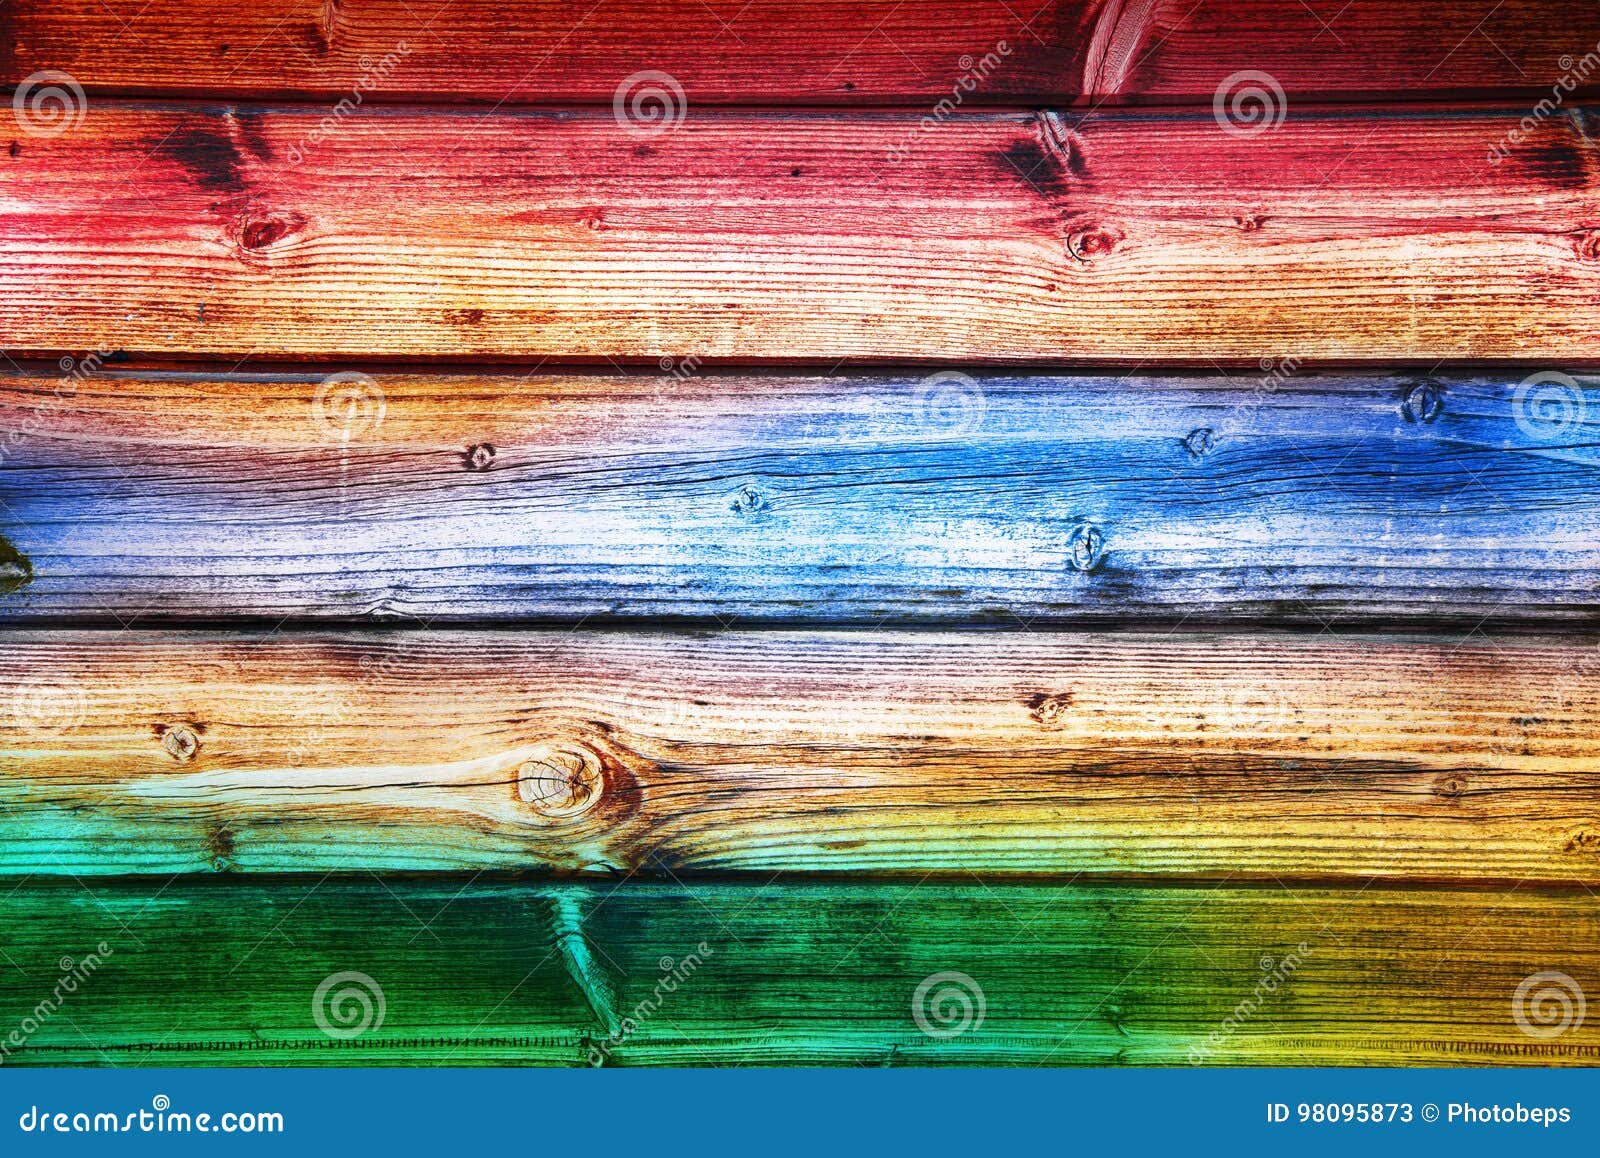 rainbows wooden background for many applications